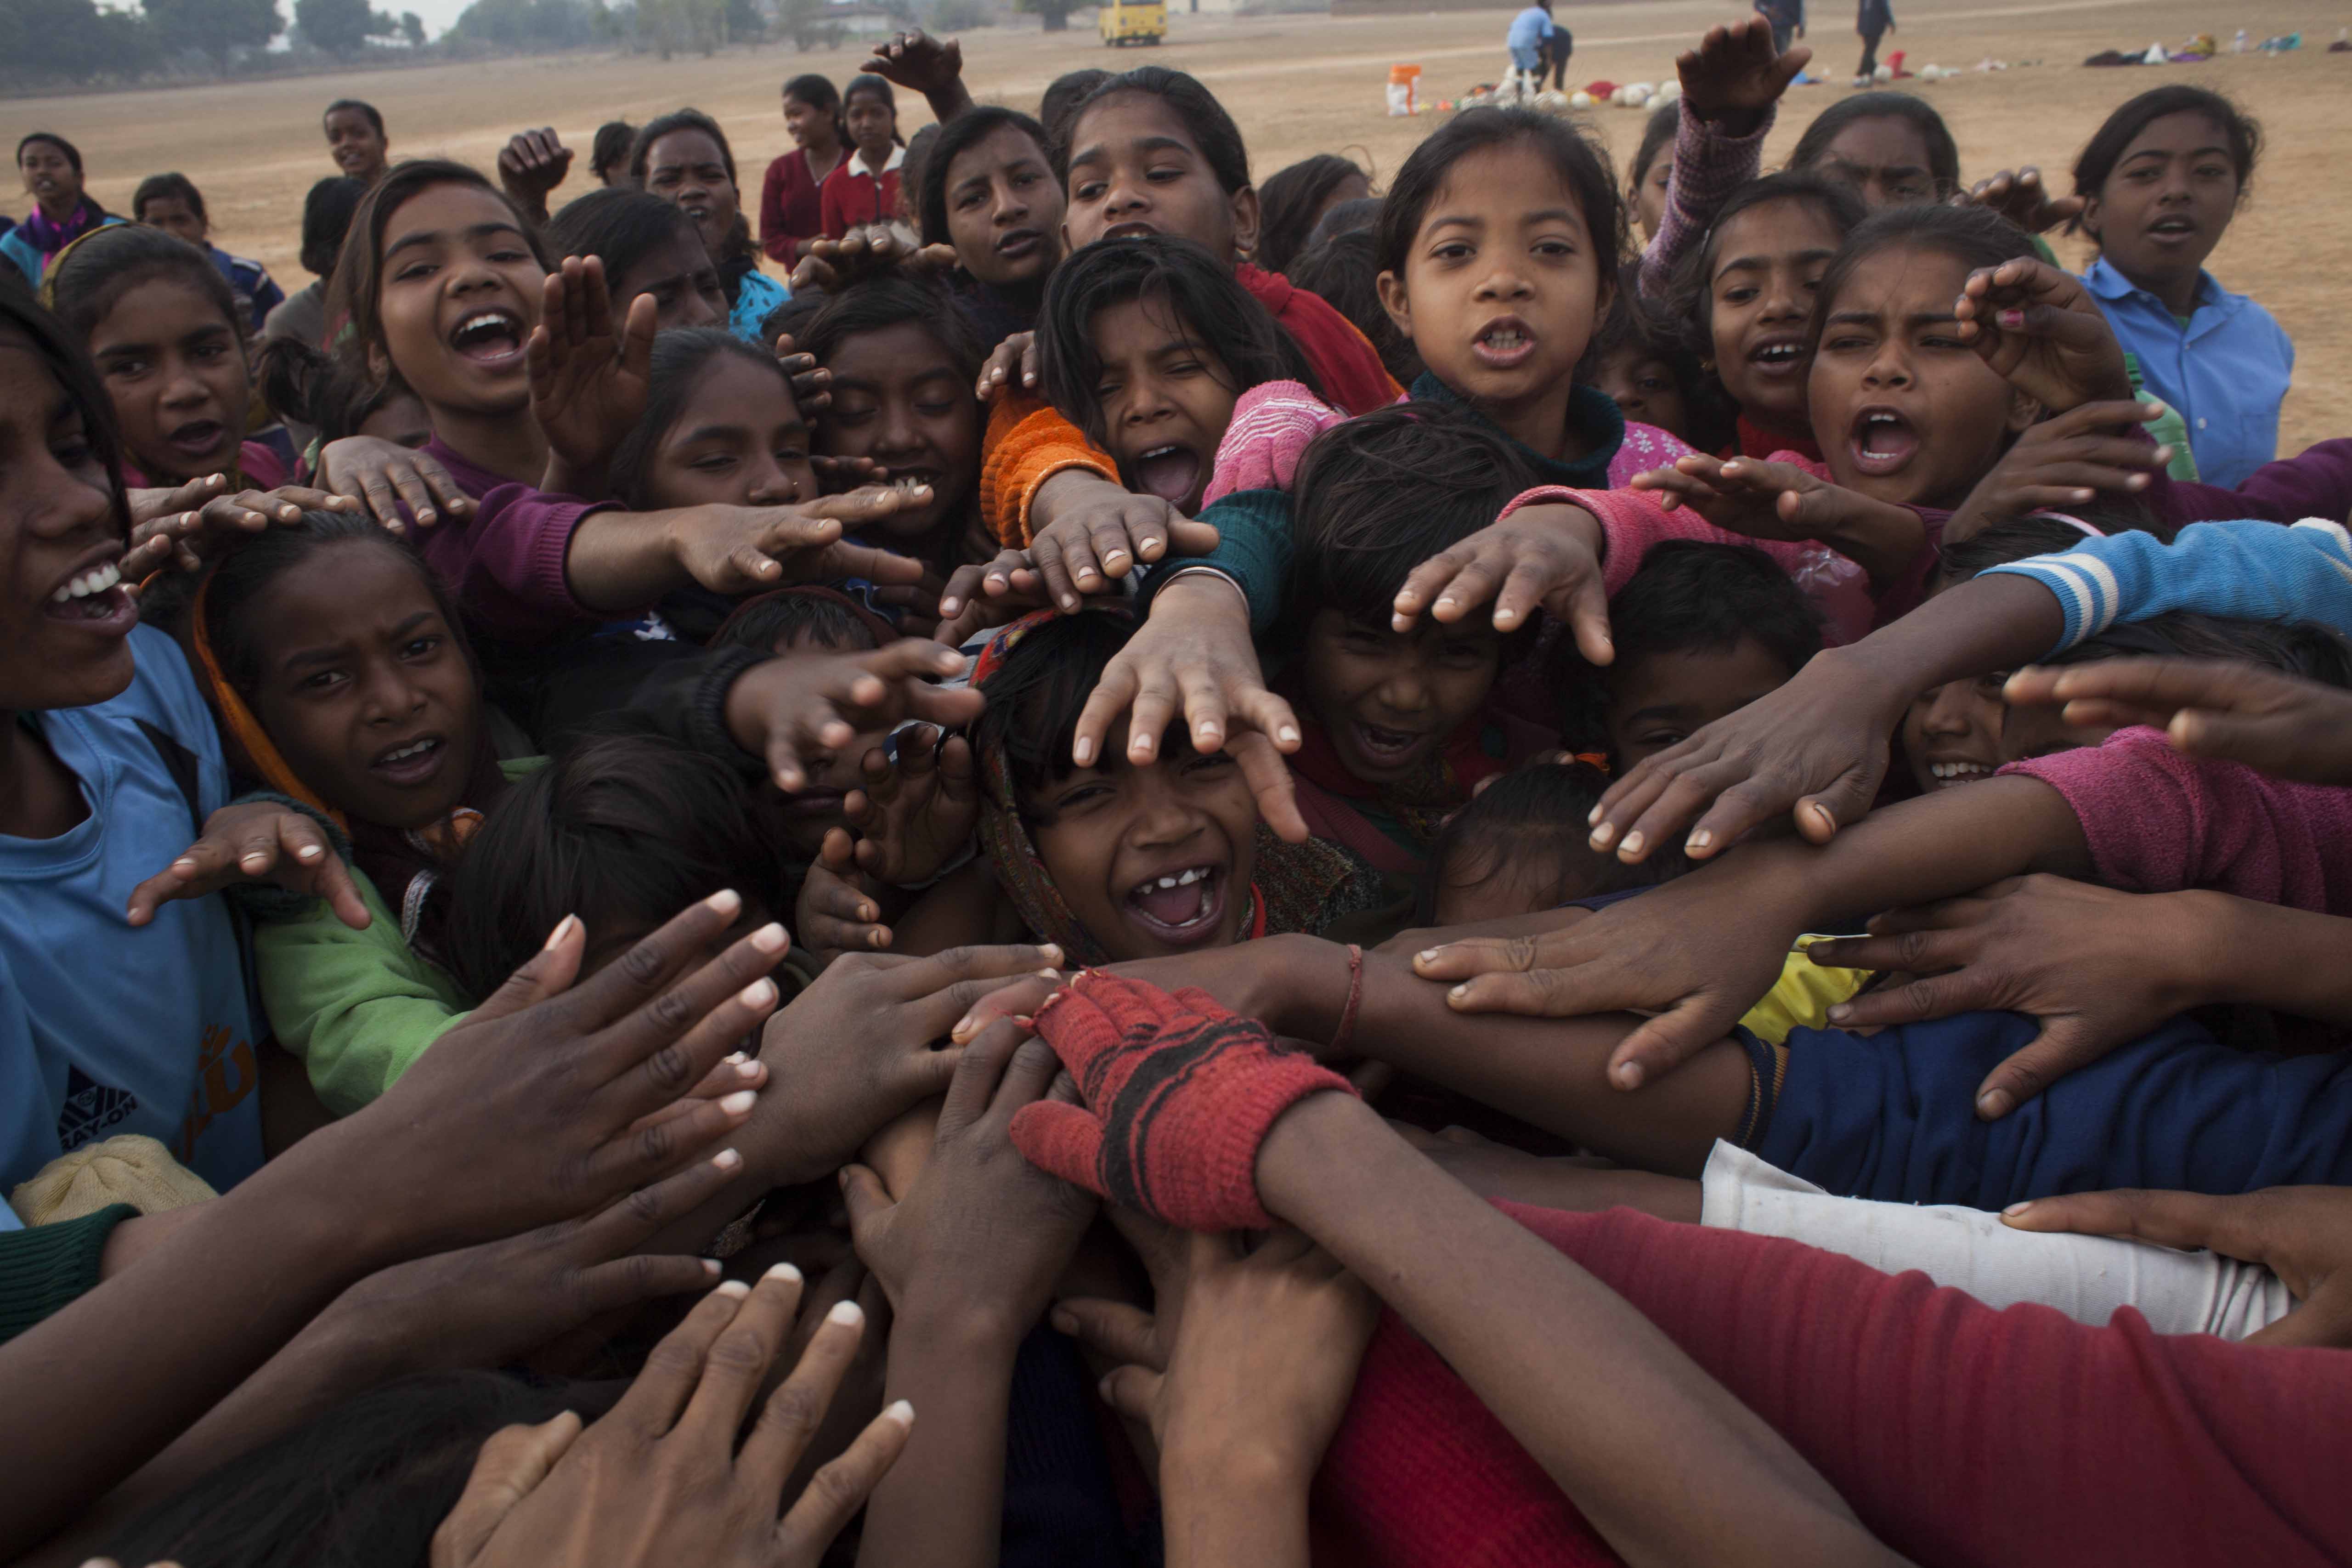 Dozens of young Indian girls press together, reaching their hands toward the middle of their huddle.